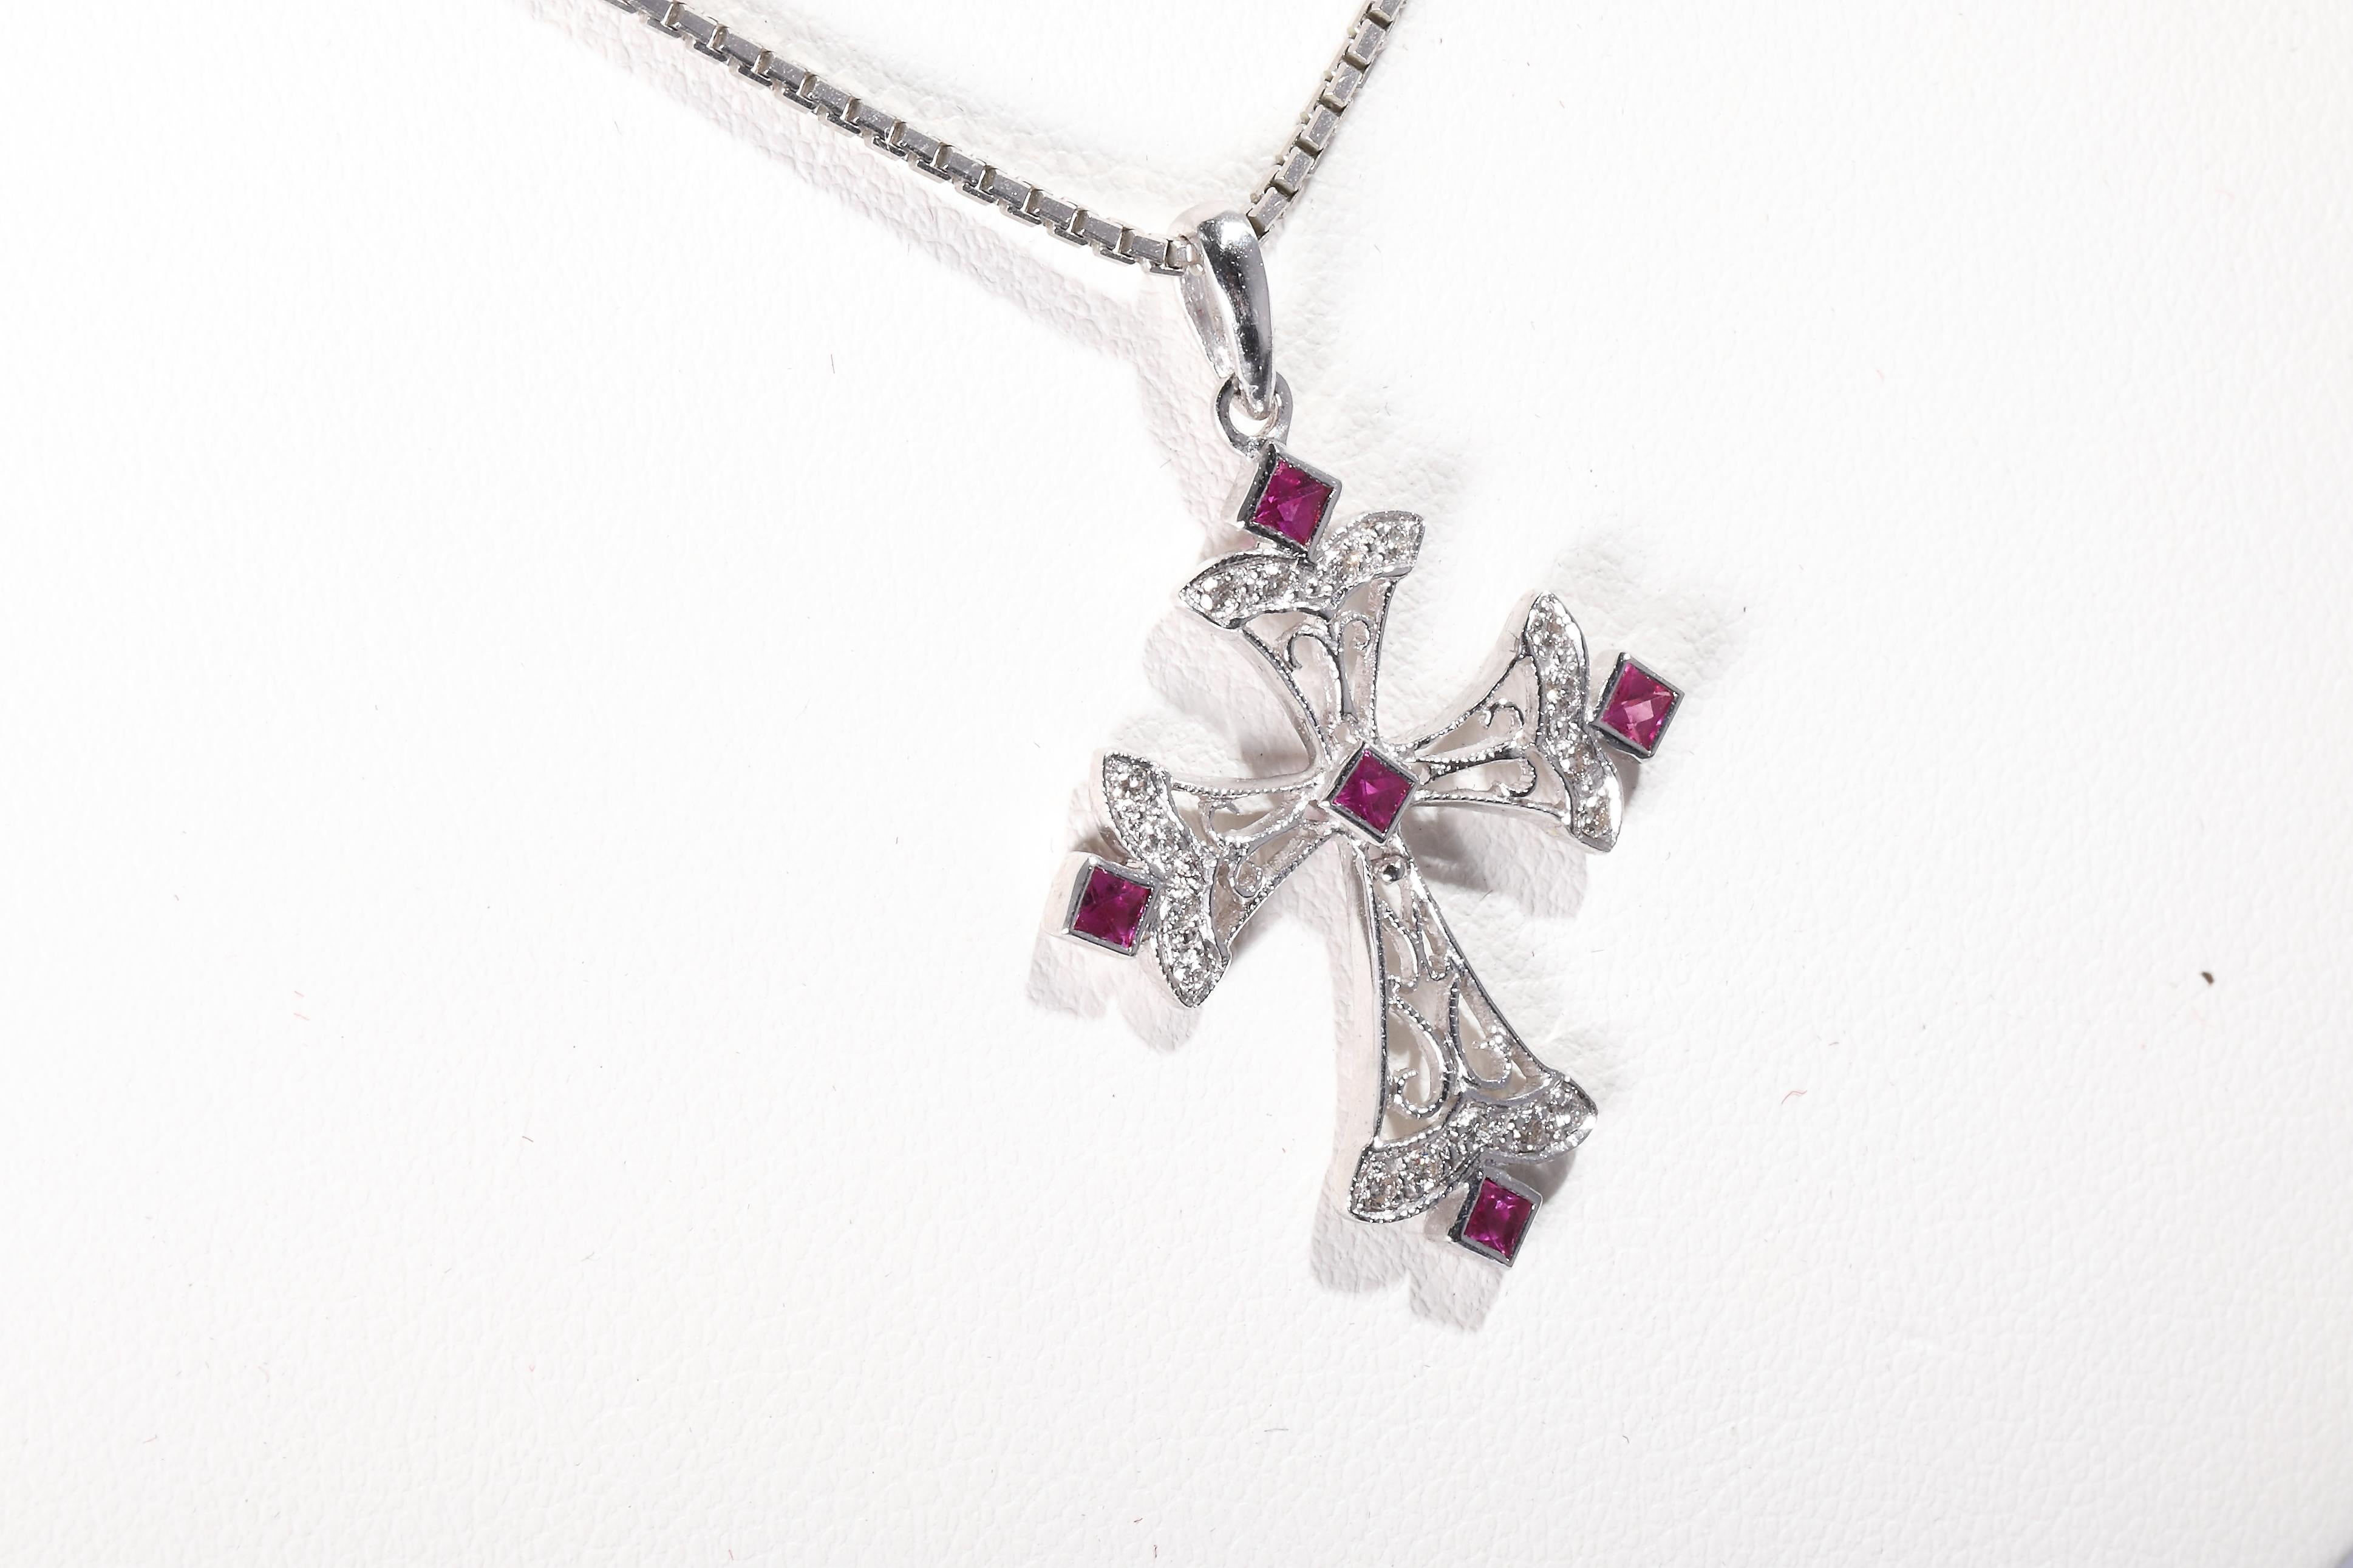 18 k white gold
hallmarked with fineness 750
5 rubies together 0,38 ct
diamonds together 0,12 ct
Size: approx. 30 x 23 mm
weight: 2,2 gram